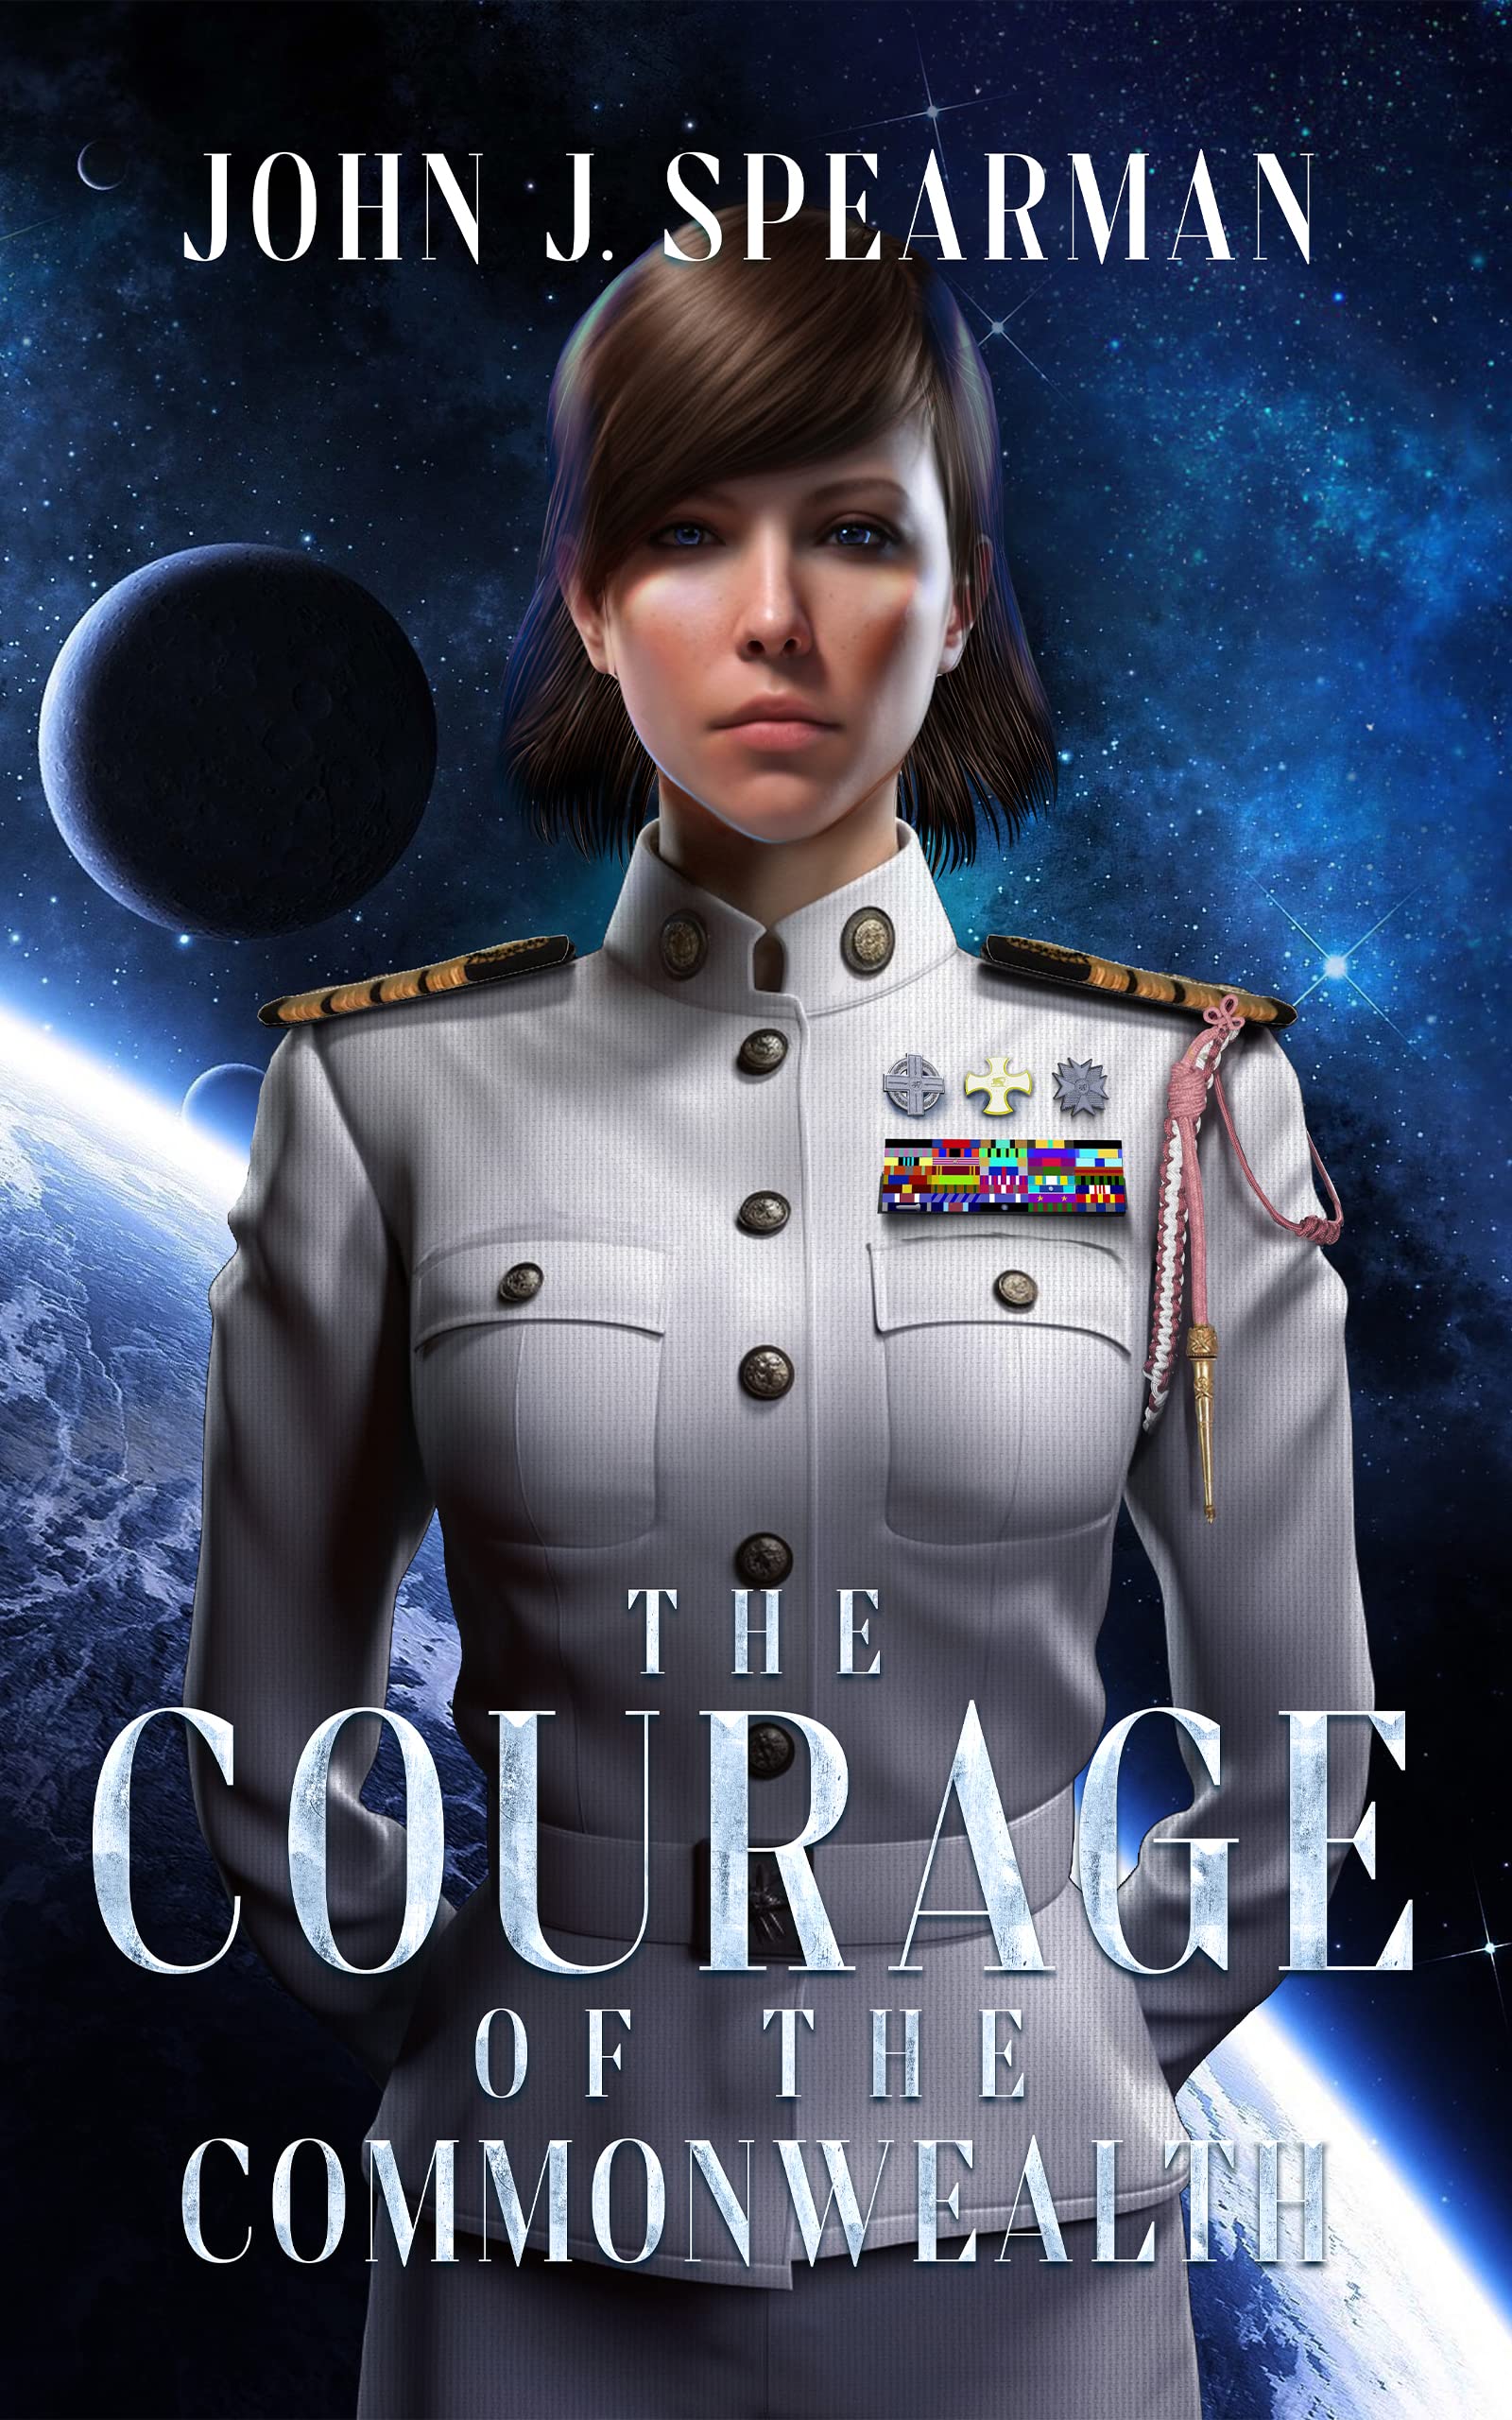 The Courage of the Commonwealth (Perseverance Andrews Book 2)